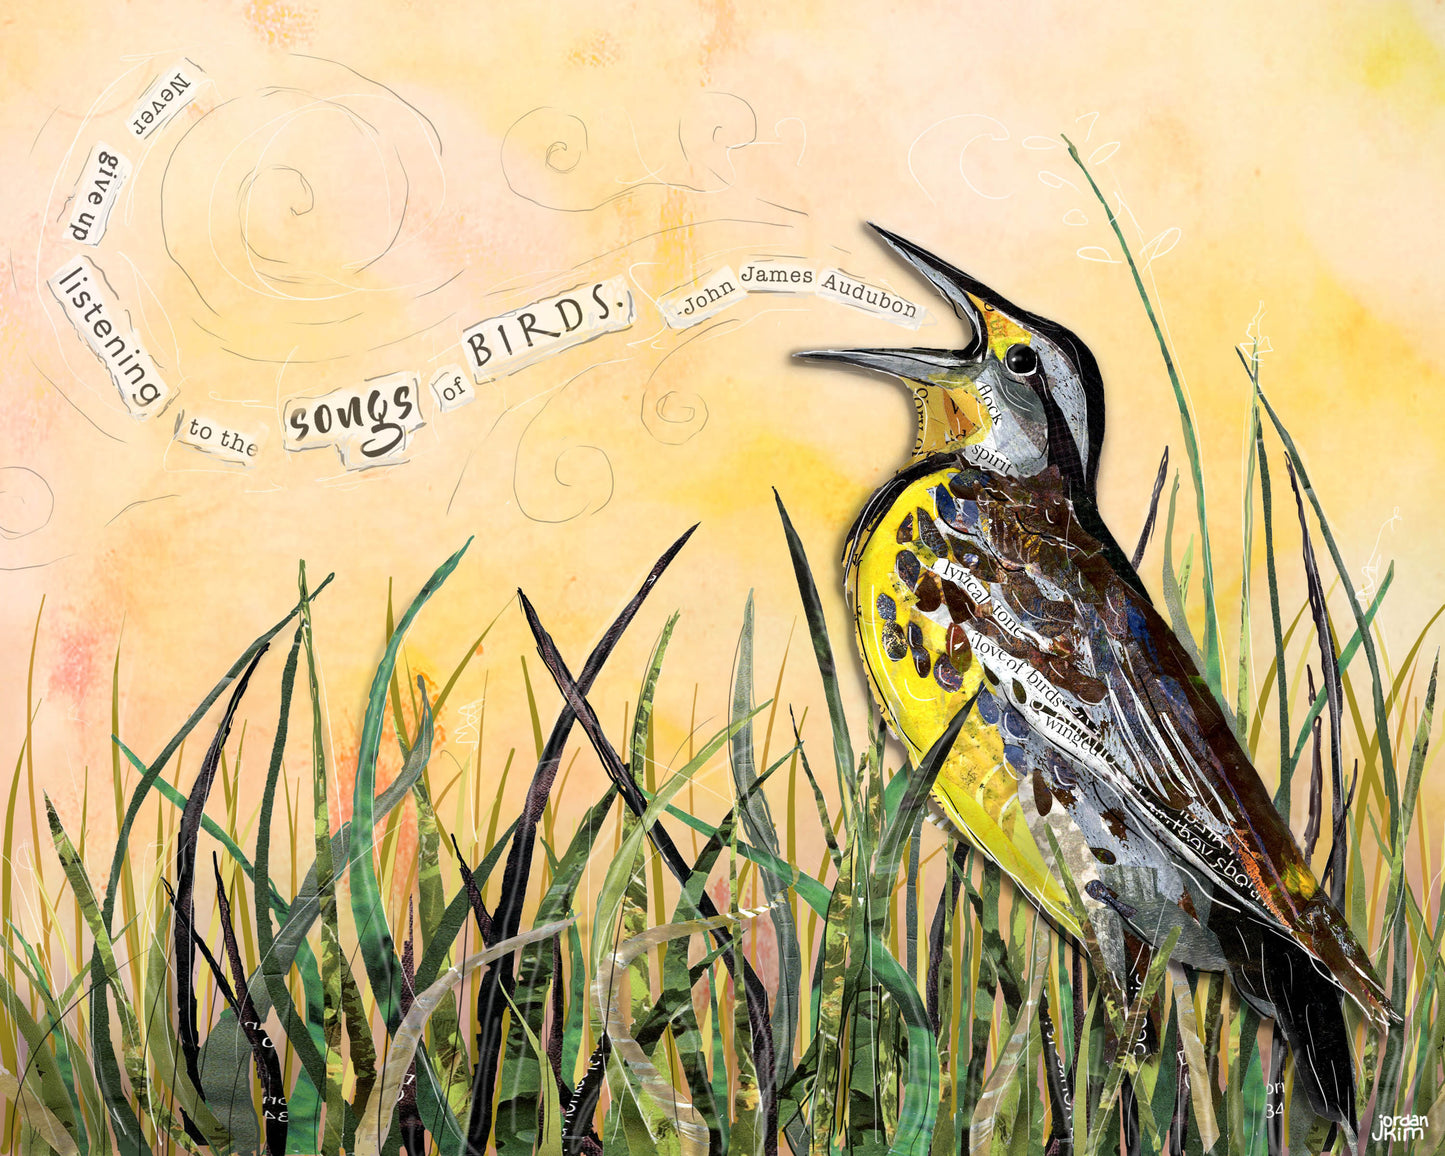 8x10 Art Print of a mixed media collage of a Western Meadowlark singing out in the grass with a John James Audubon quote